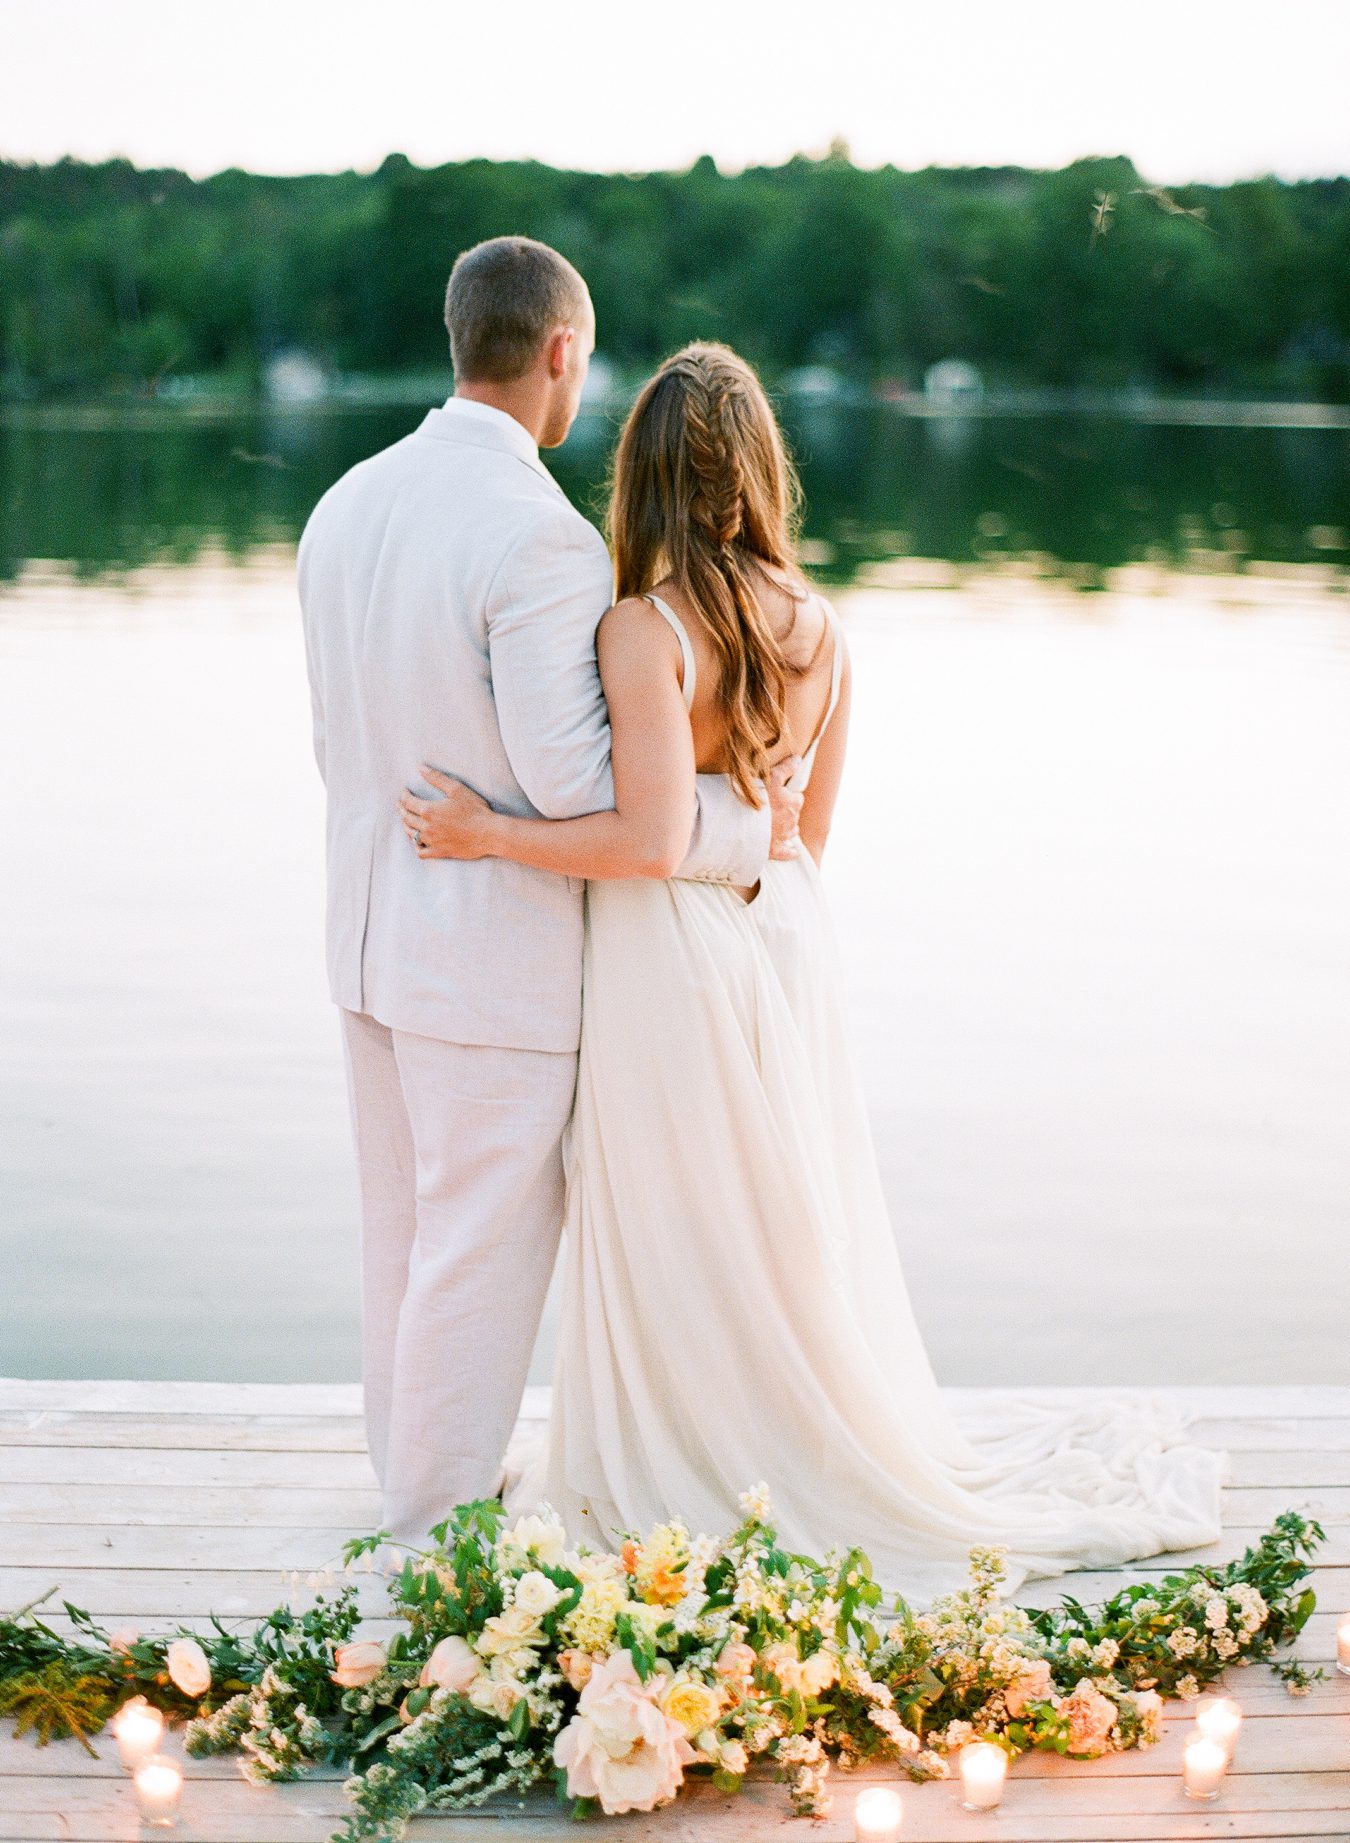 Traverse City Event Planner | Fountain Point Resort | Sincerely, Ginger Event Design & Production | BLOOM Floral Design | Cory Weber Photography